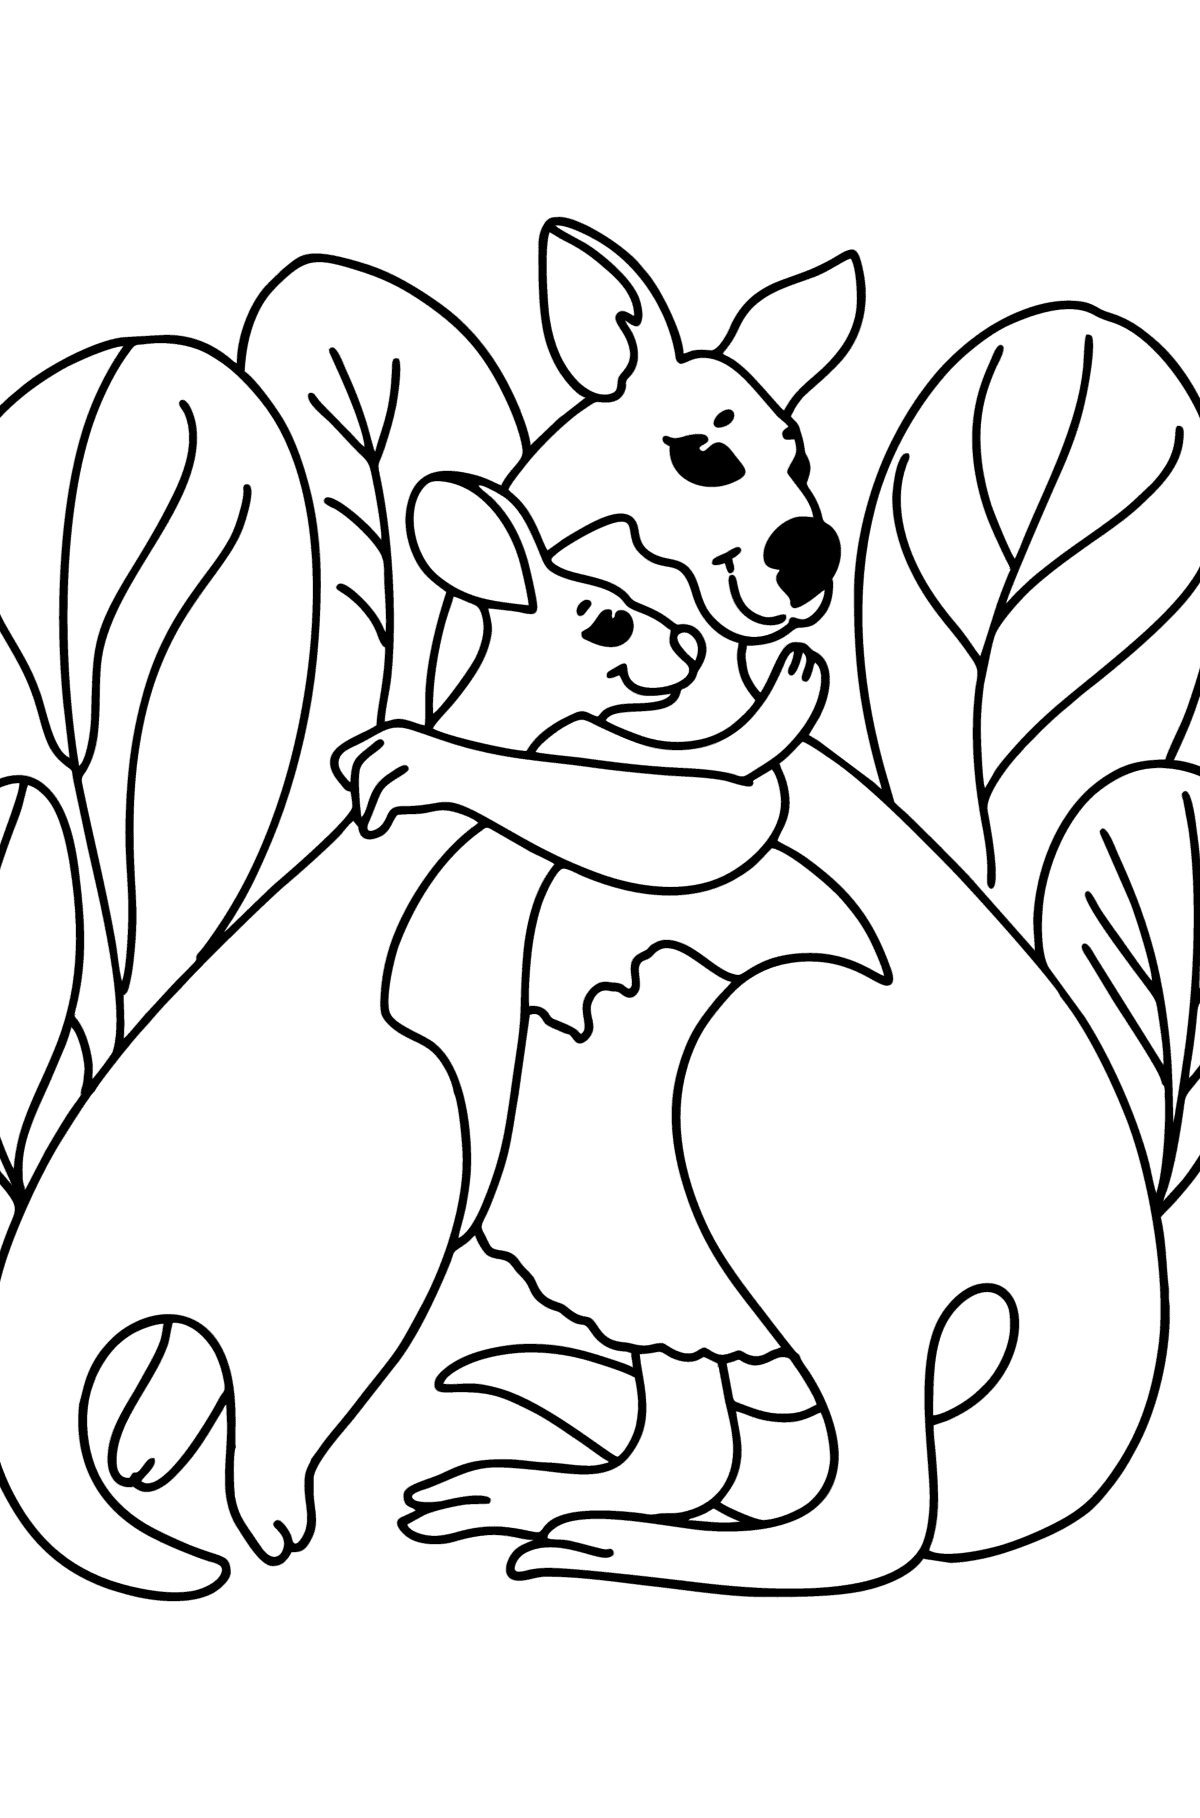 Coloring page - cute kangaroo - Coloring Pages for Kids